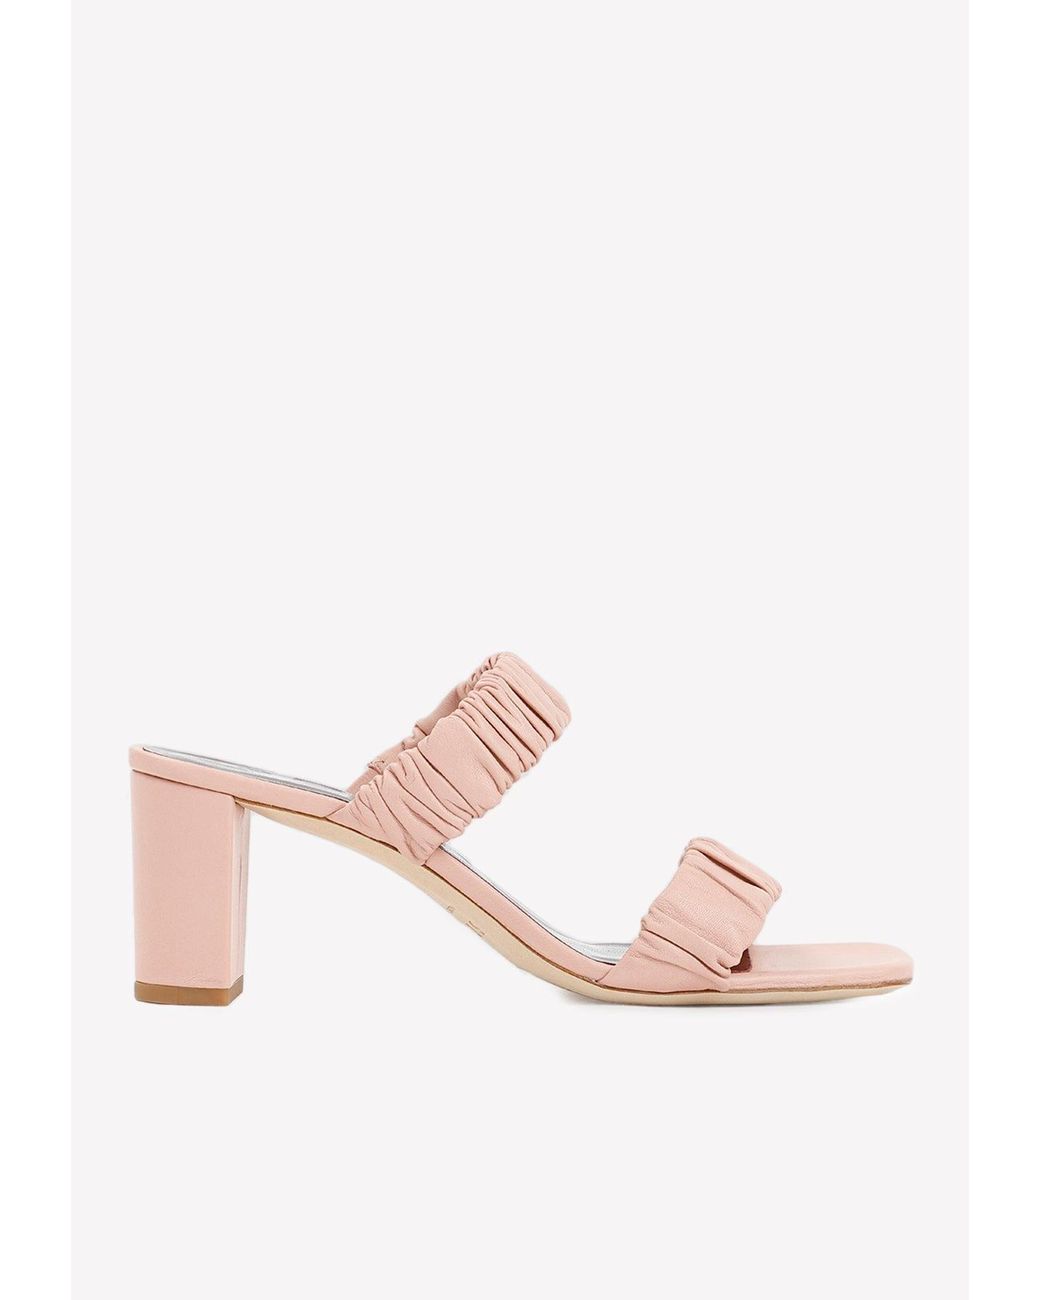 STAUD Frankie 50 Ruched Leather Sandals in Pink | Lyst